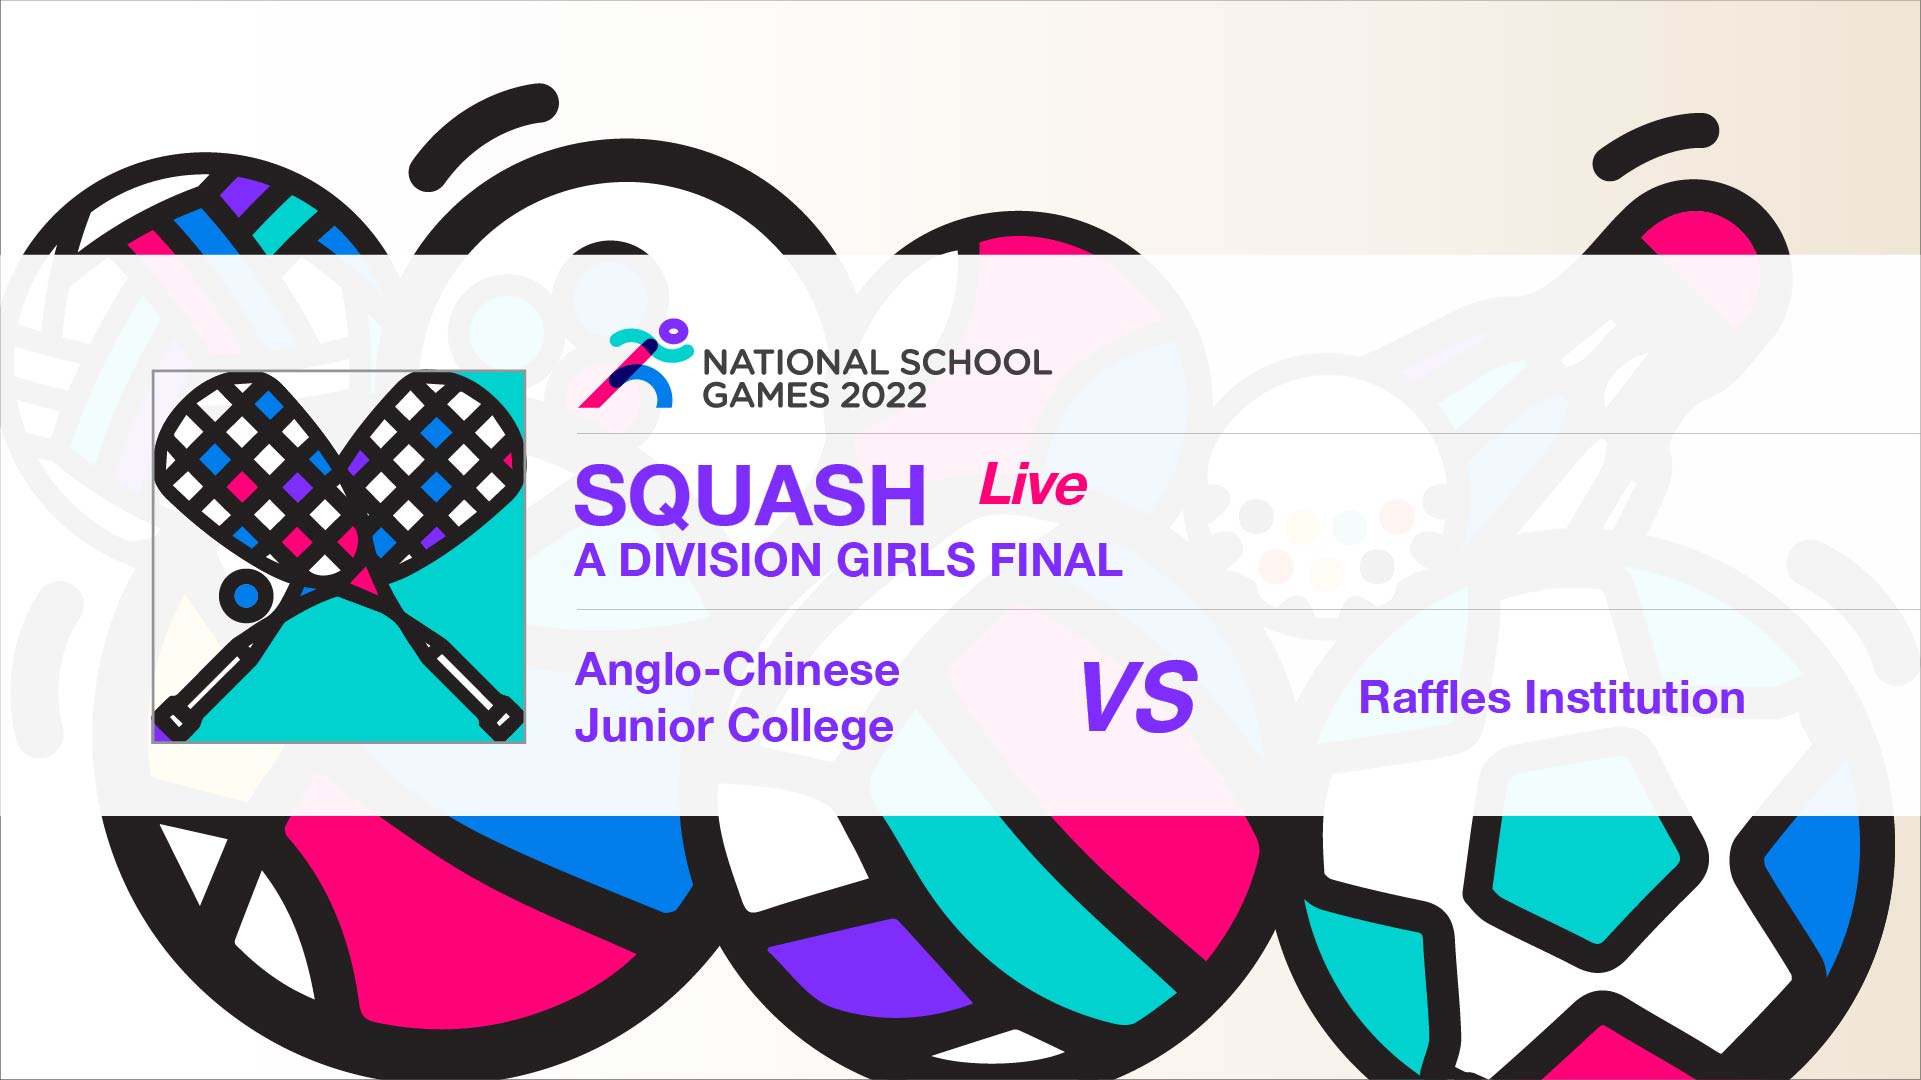 SSSC Squash A Division Girls Final | Anglo-Chinese Junior College vs Raffles Institution